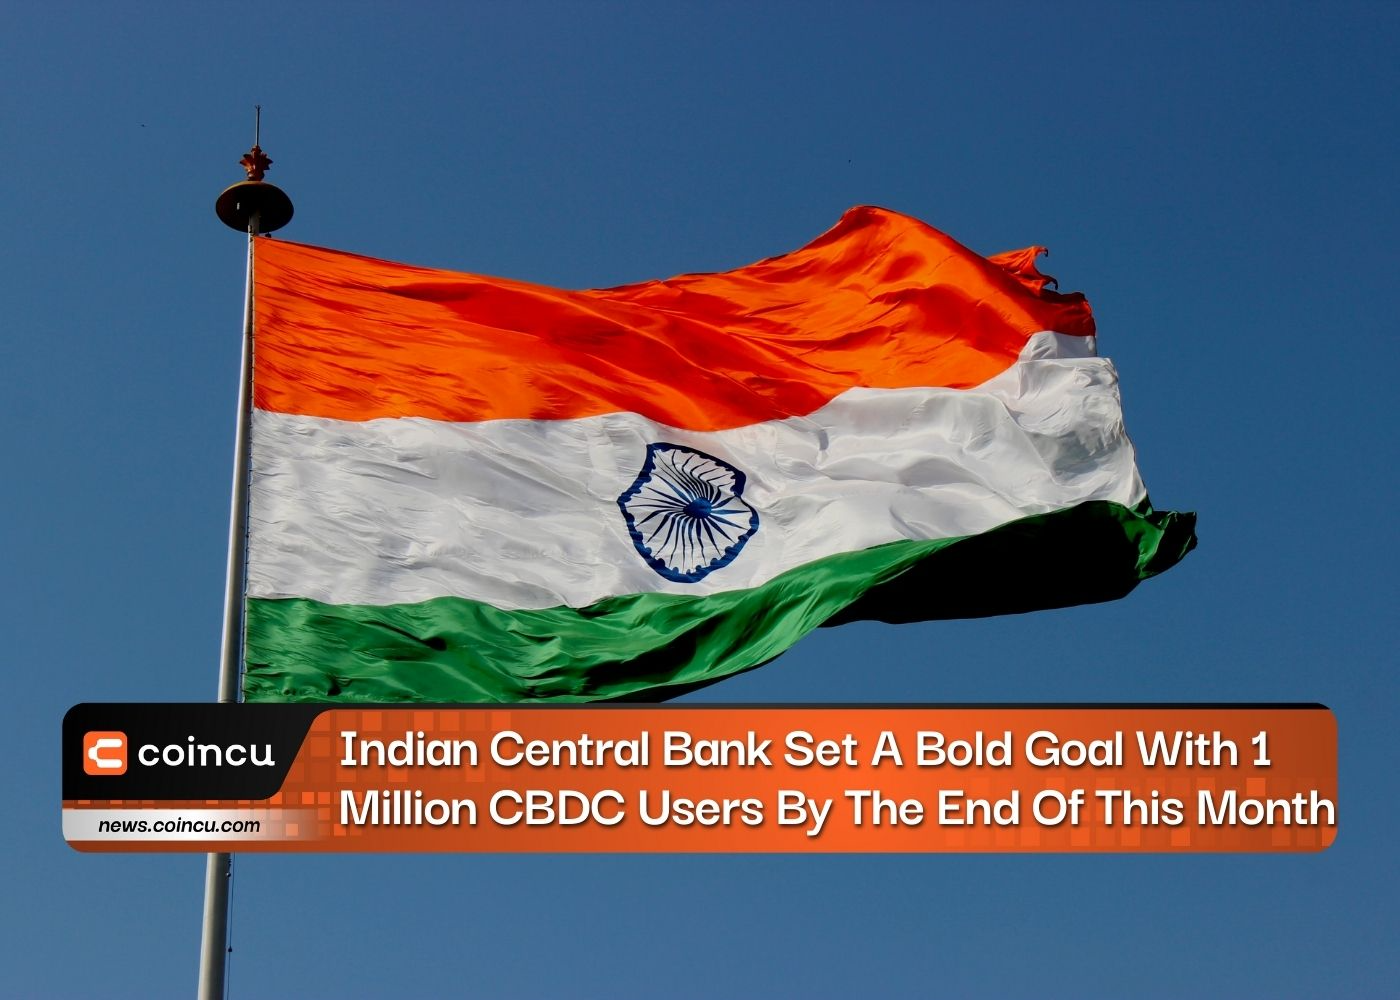 Indian Central Bank Set A Bold Goal With 1 Million CBDC Users By The End Of This Month